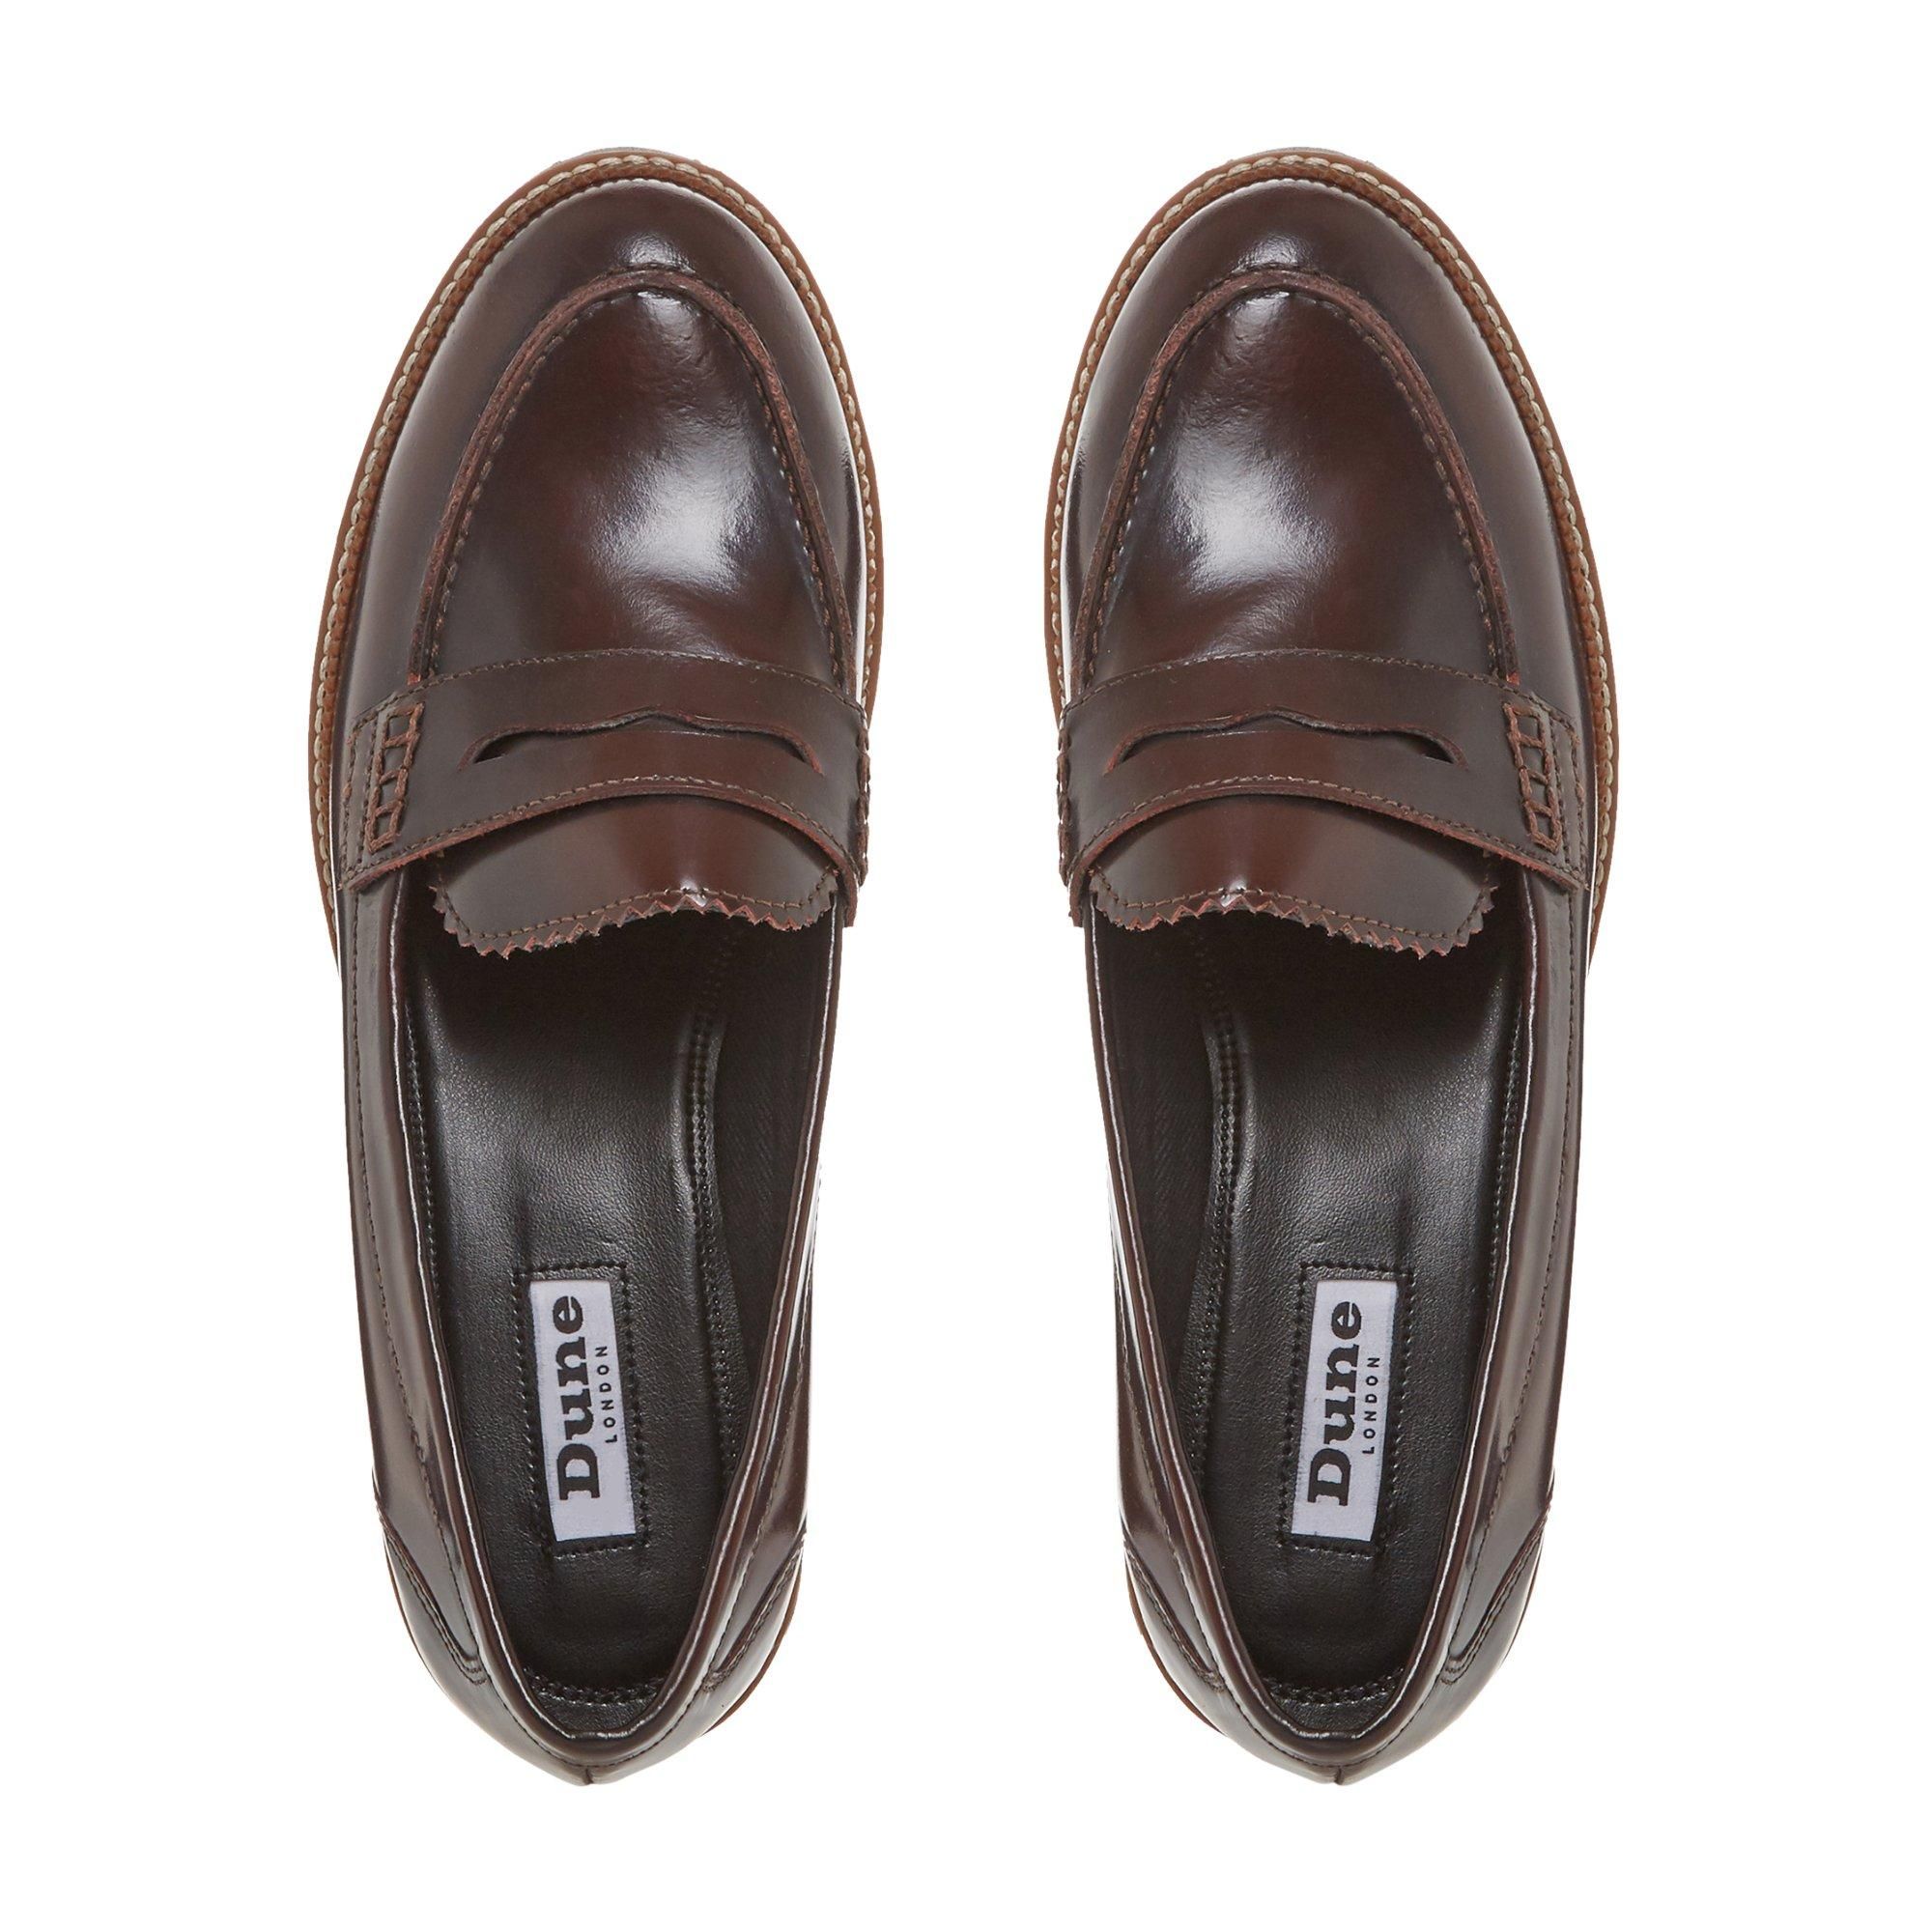 For sophisticated footwear, look no further than Dune's Gecho loafer. Made from semi-patent leather for a timeless finish. It rests on a chunky sole detailed with contrasting topstitch.